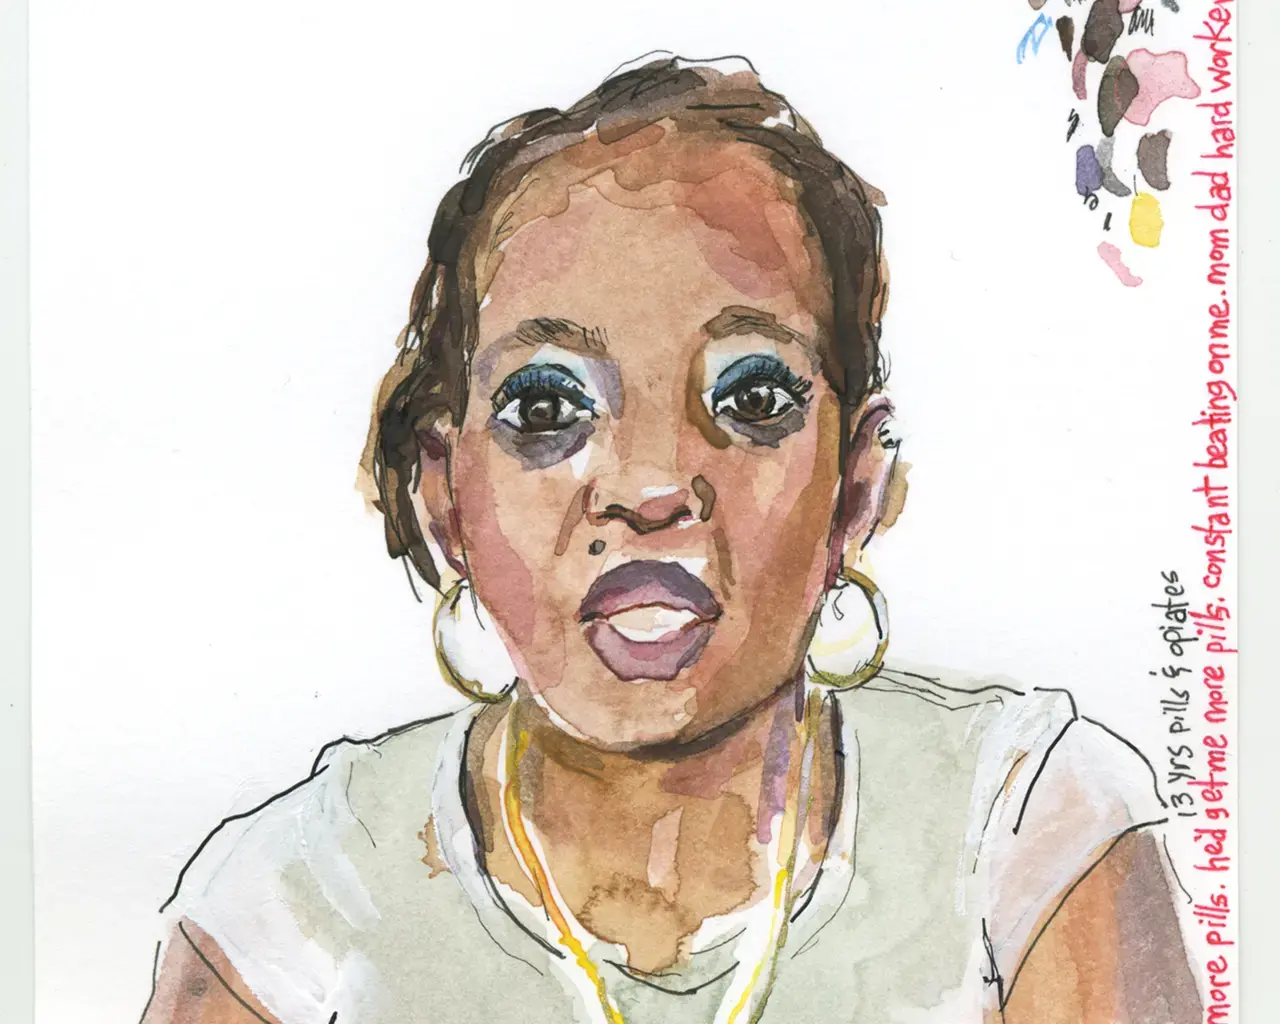 Charmaine Wheatley,&nbsp;Portrait of Angel Ludgood, 2017; watercolor, ink,&nbsp;and gouache on paper. Image courtesy of the artist.